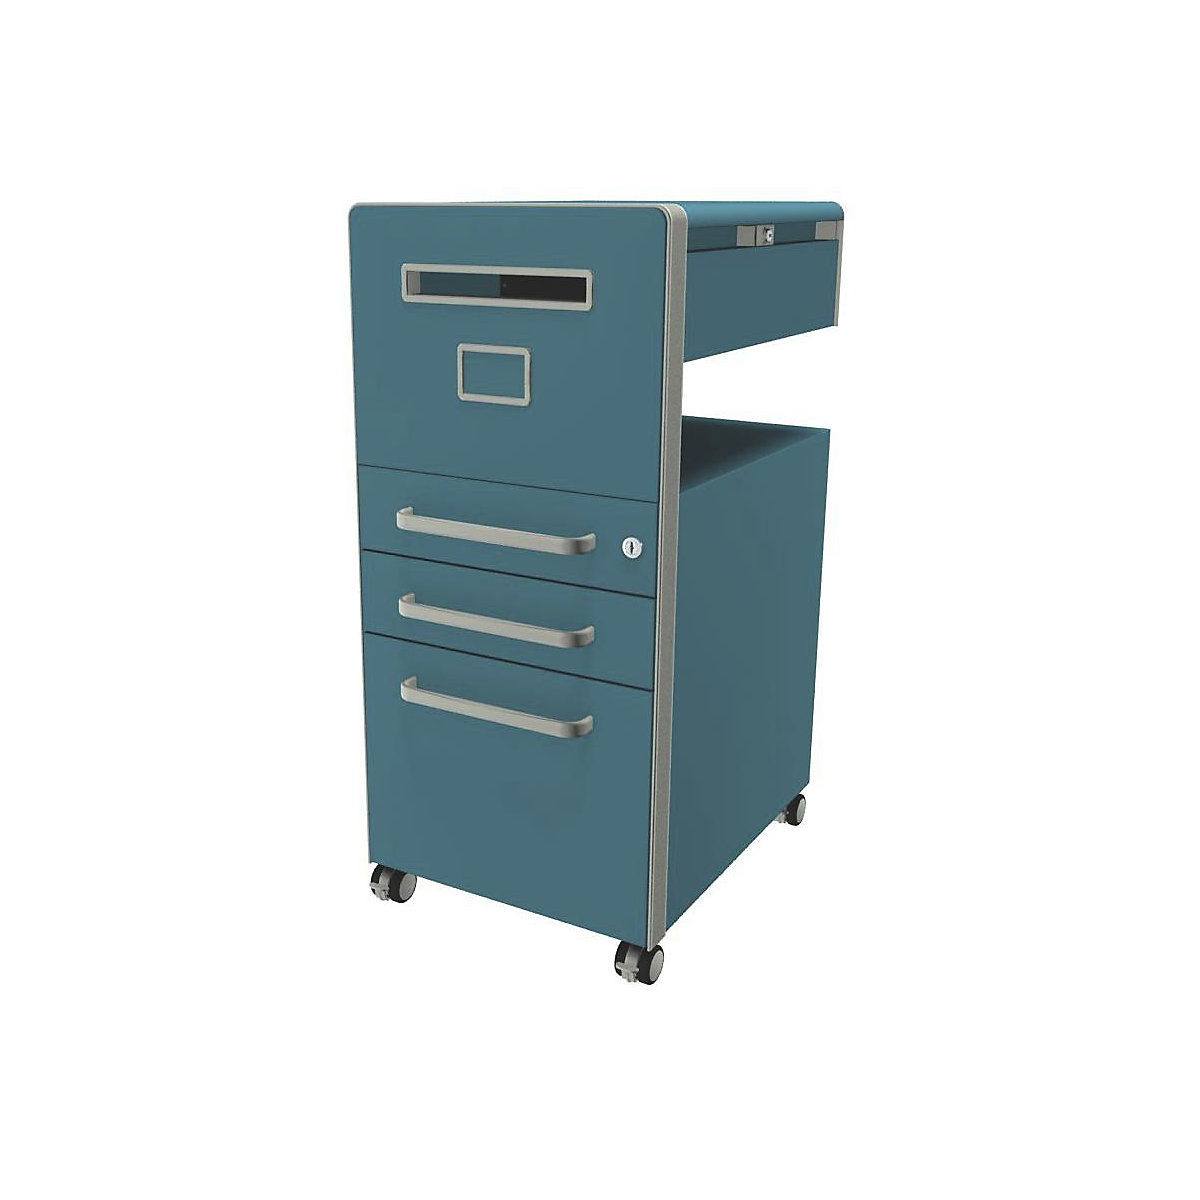 Bite™ pedestal furniture, with 1 whiteboard, opens on the left side – BISLEY, with 2 universal drawers, 1 suspension file drawer, azure-11